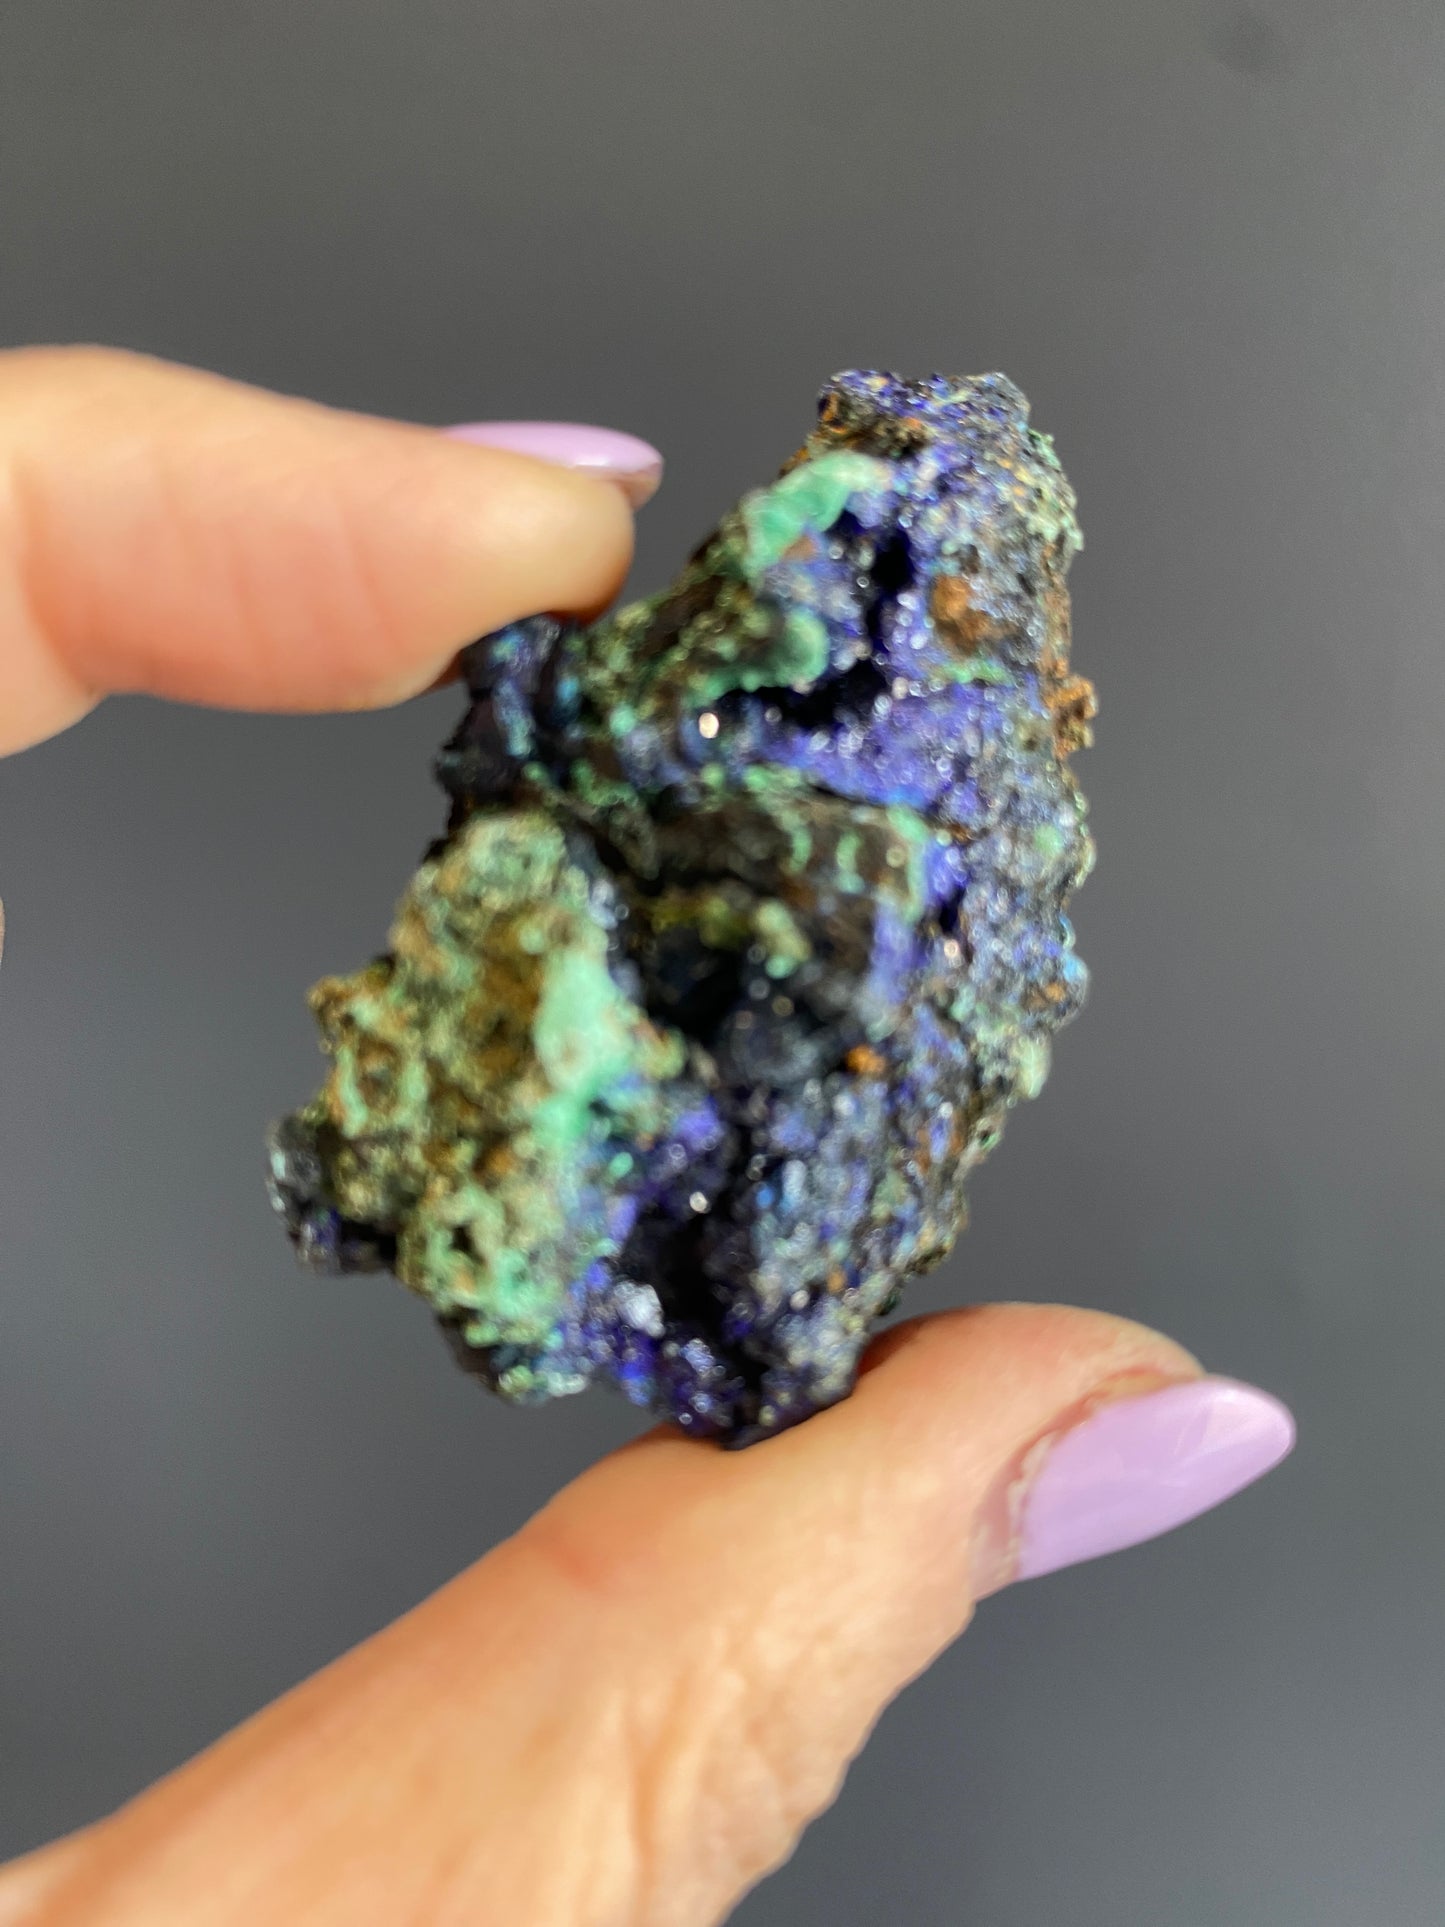 Azurite Rough Natural Specimen Raw Azurite and Malachite / Natural Azurite Specimen / Gemmy Azurite from Fujian, Guangdong Province